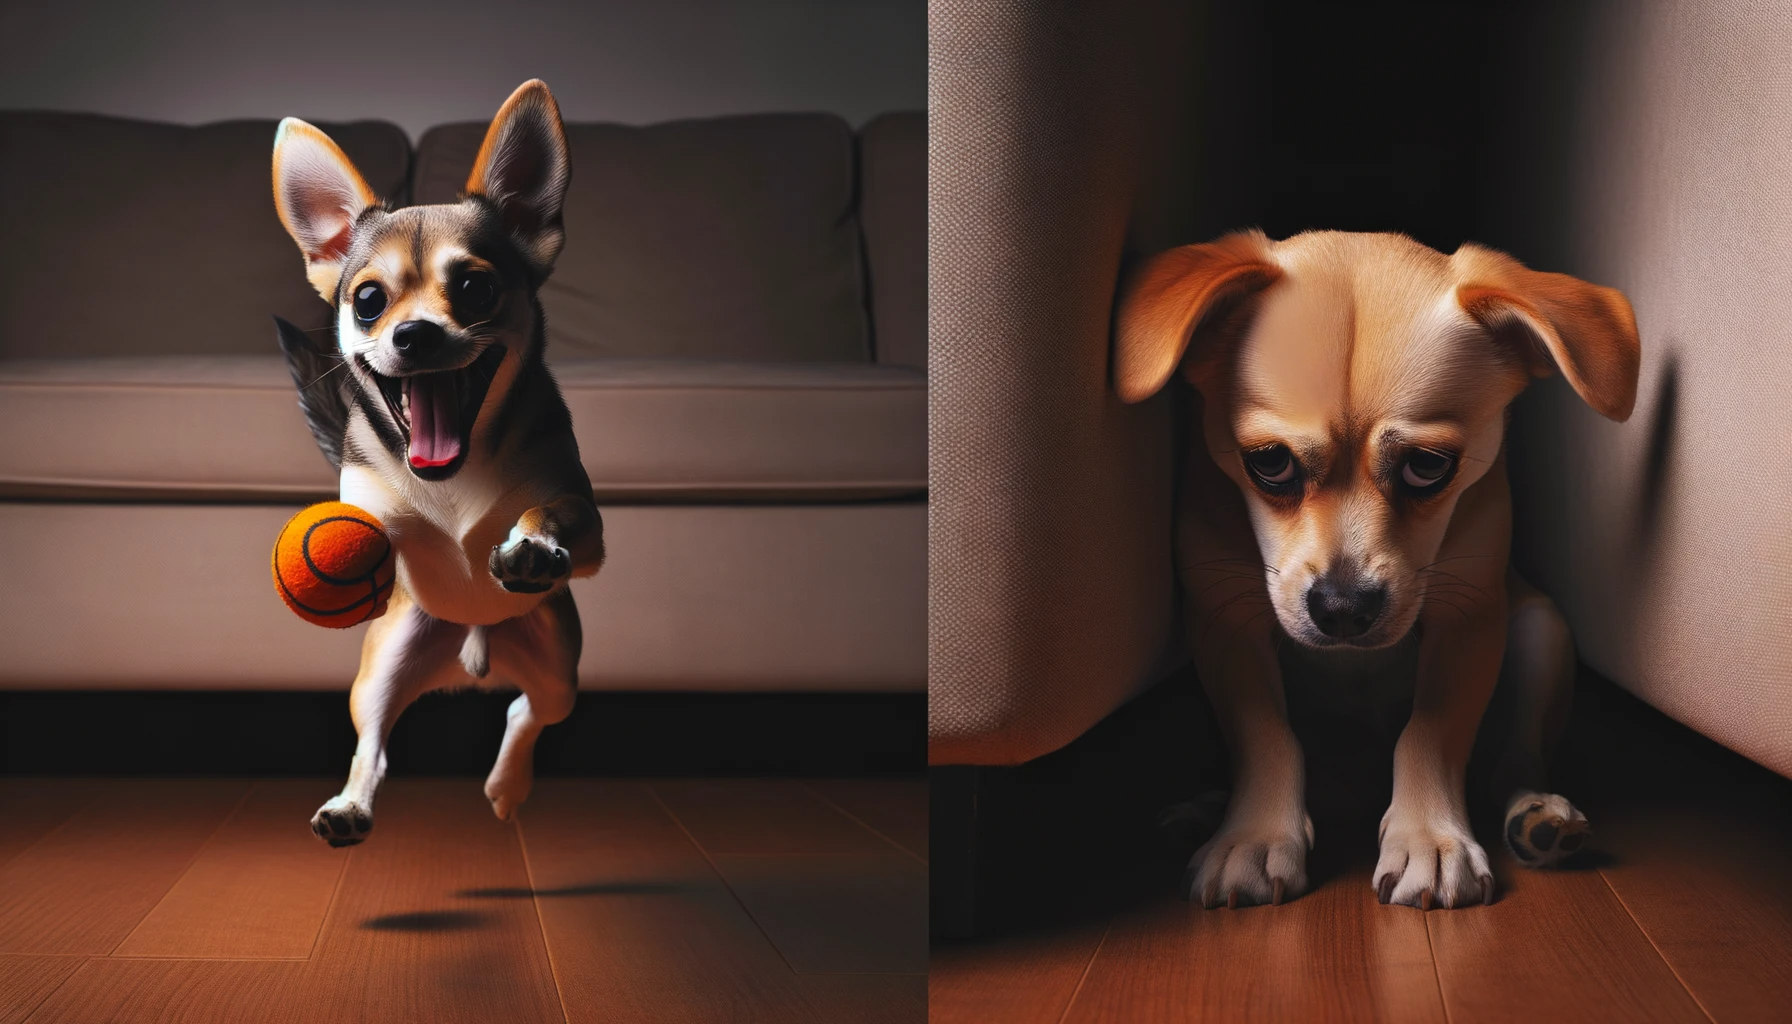 A Labrahuahua showcasing its mood swings, from jumping for joy to sulking in a corner